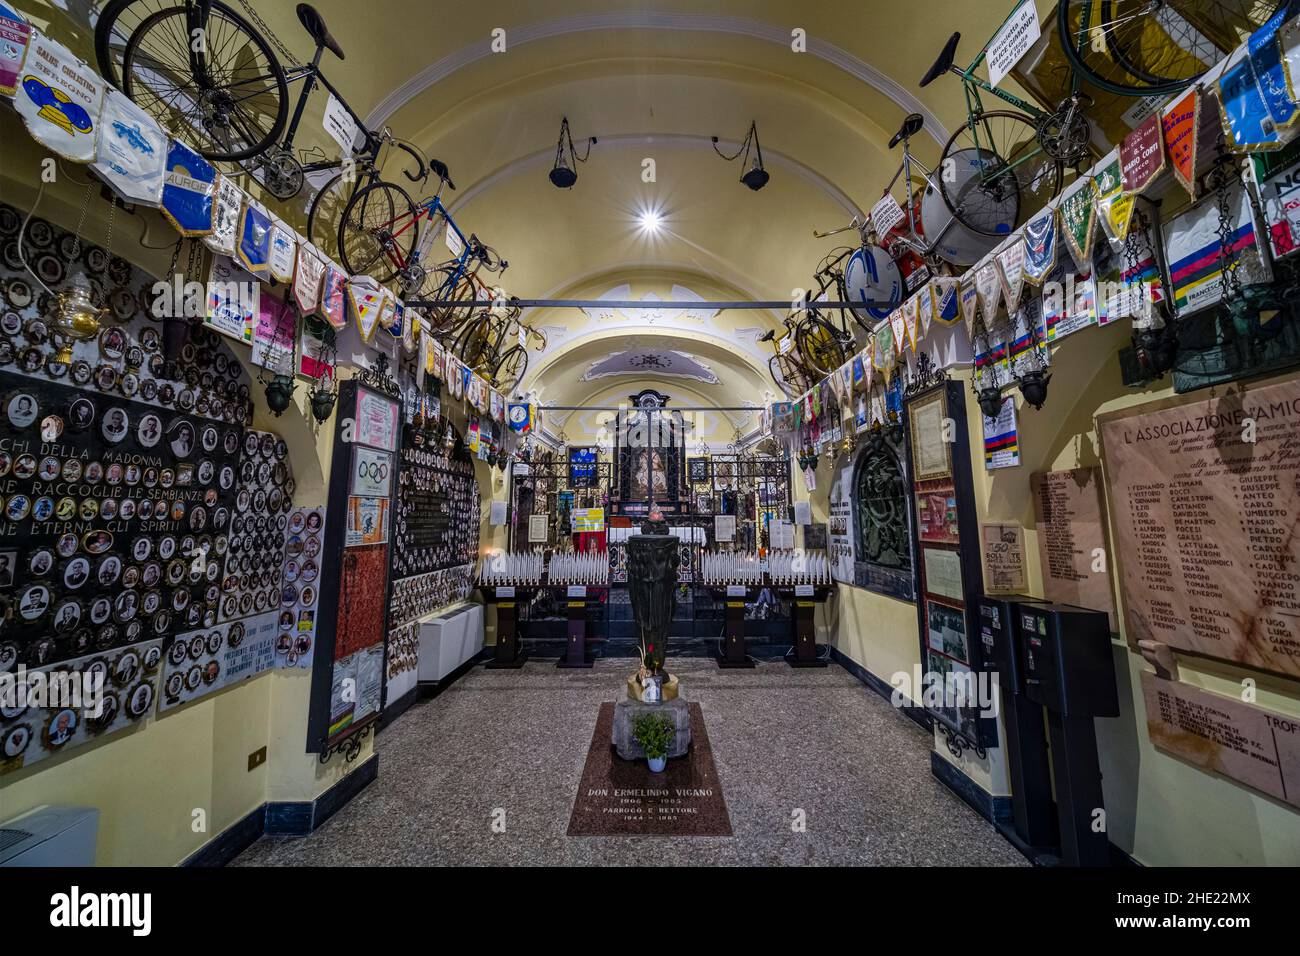 The little church on the hill Madonna del Ghisallo is dedicated to cyclists and looks inside more like a museum than a church. Stock Photo